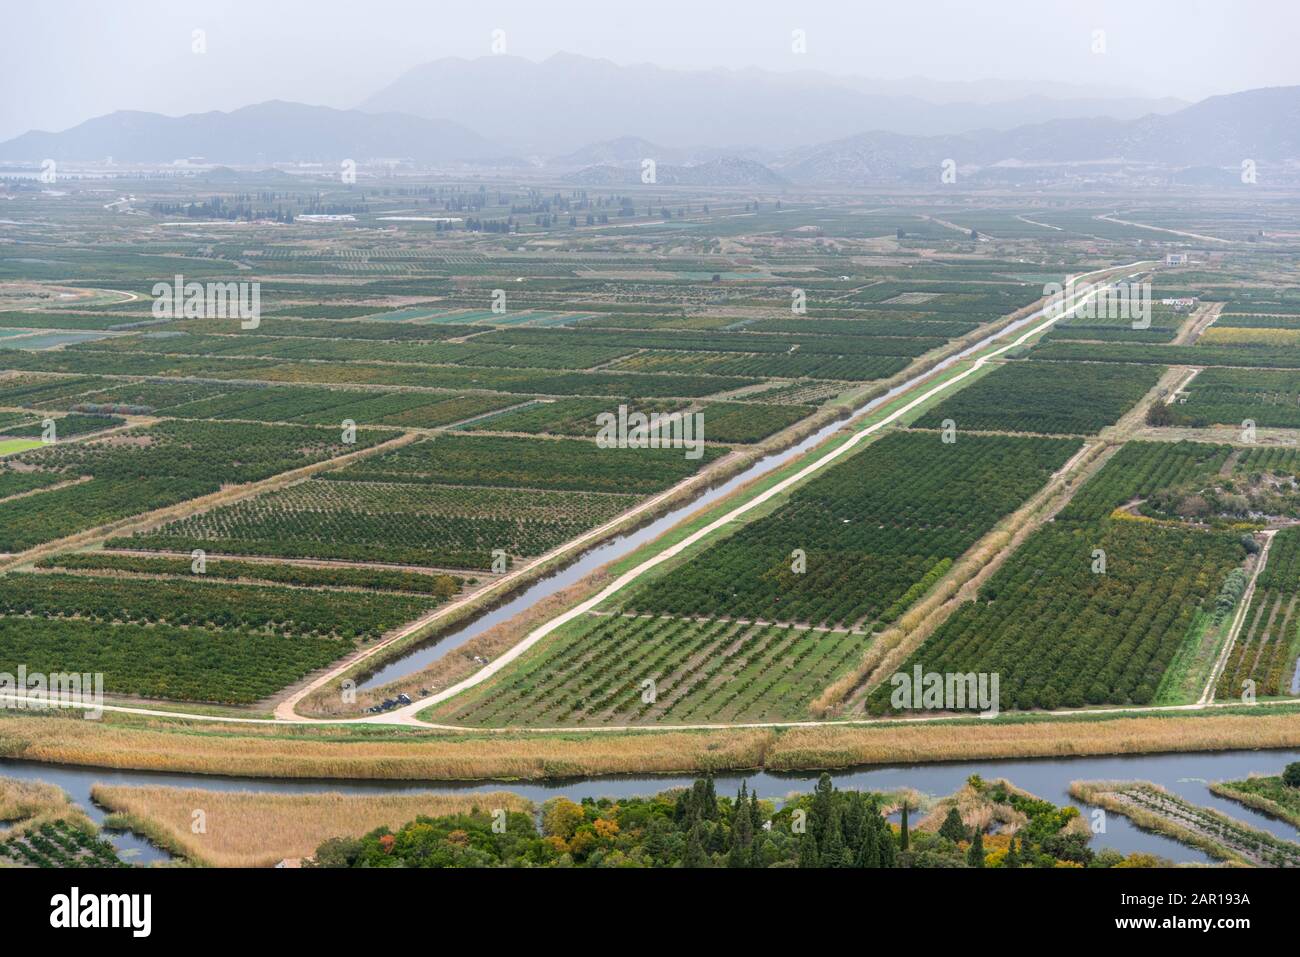 A view of the irrigated agricultural orchards and fields in the delta of the river Neretva in Opuzen, Croatia. Croatia, Dalmatia, orchards and gardens Stock Photo